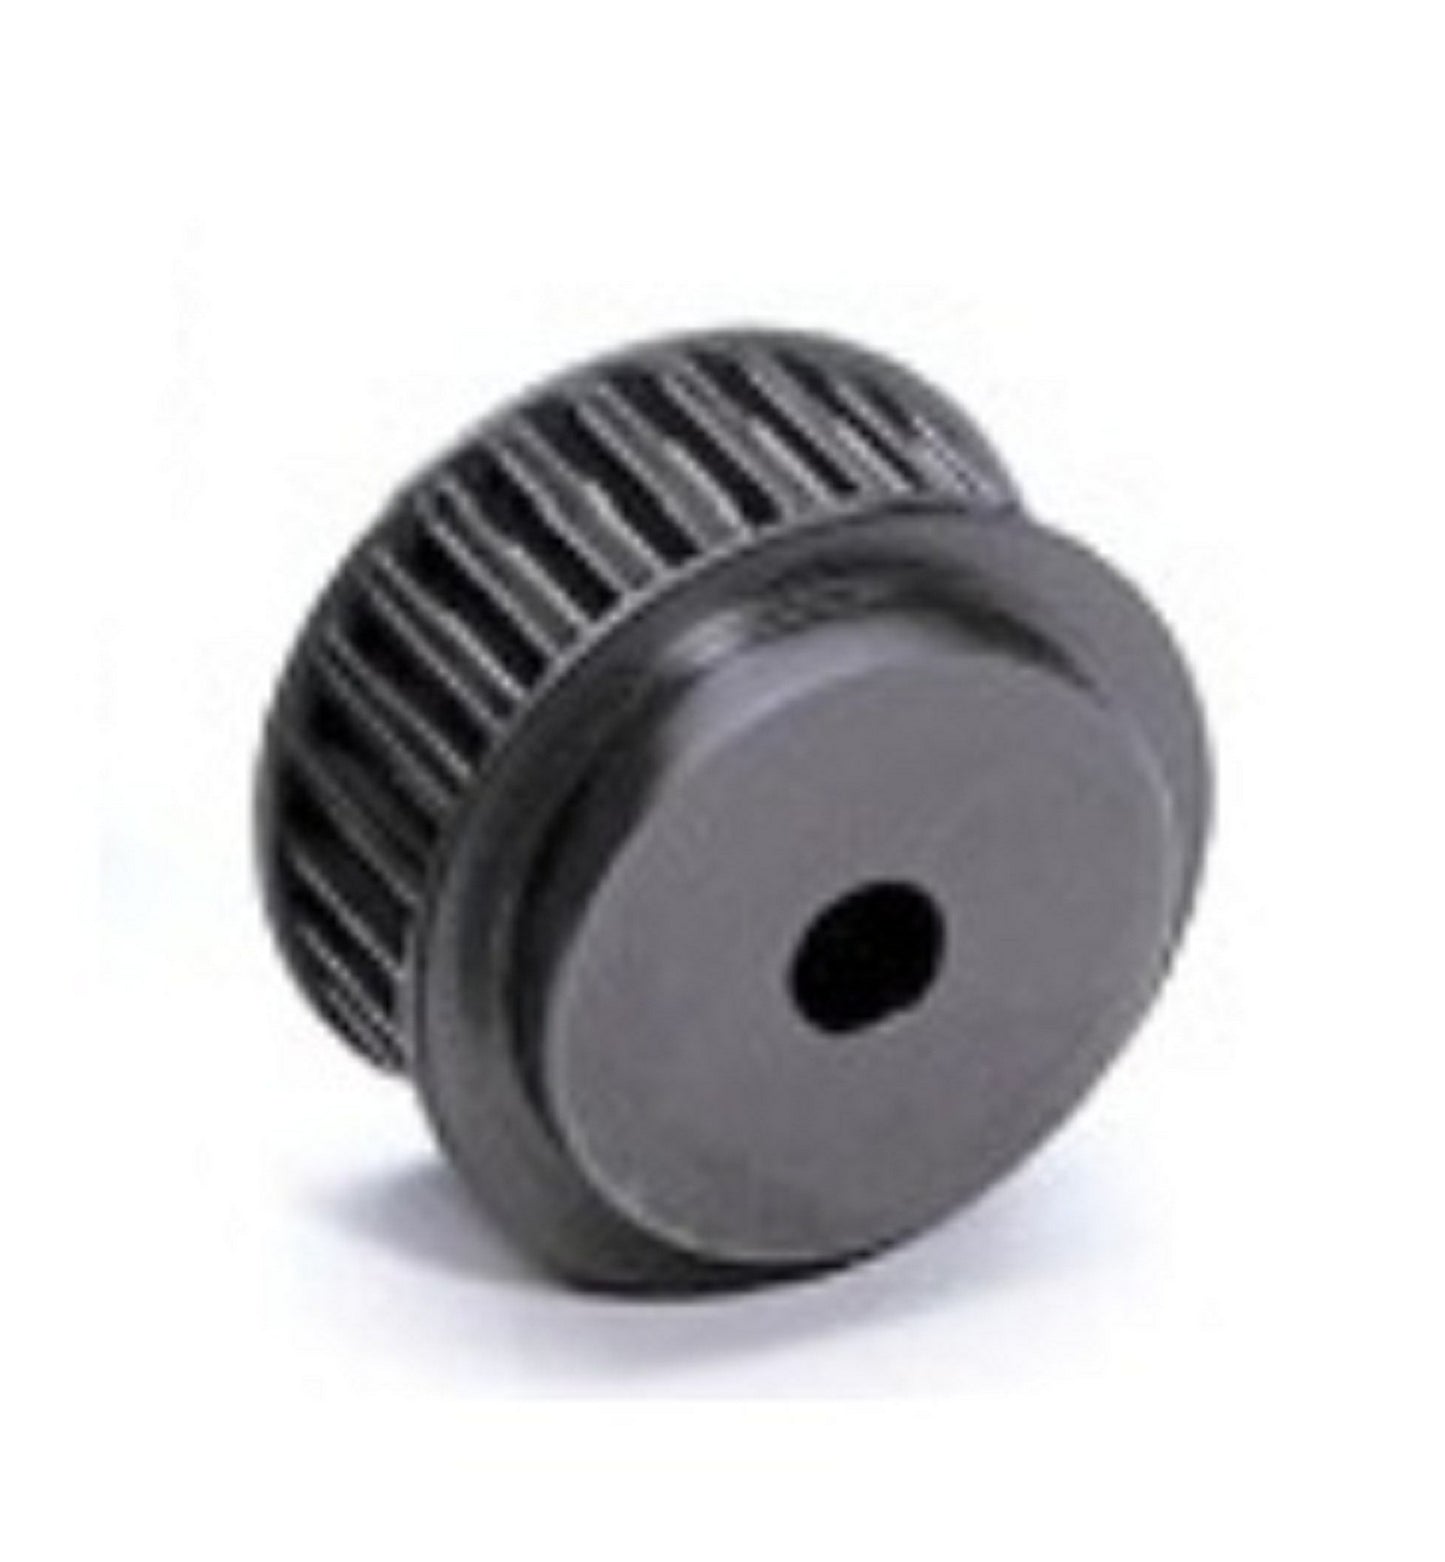 29-8M-30 Steel Pulley 29 tooth MPB